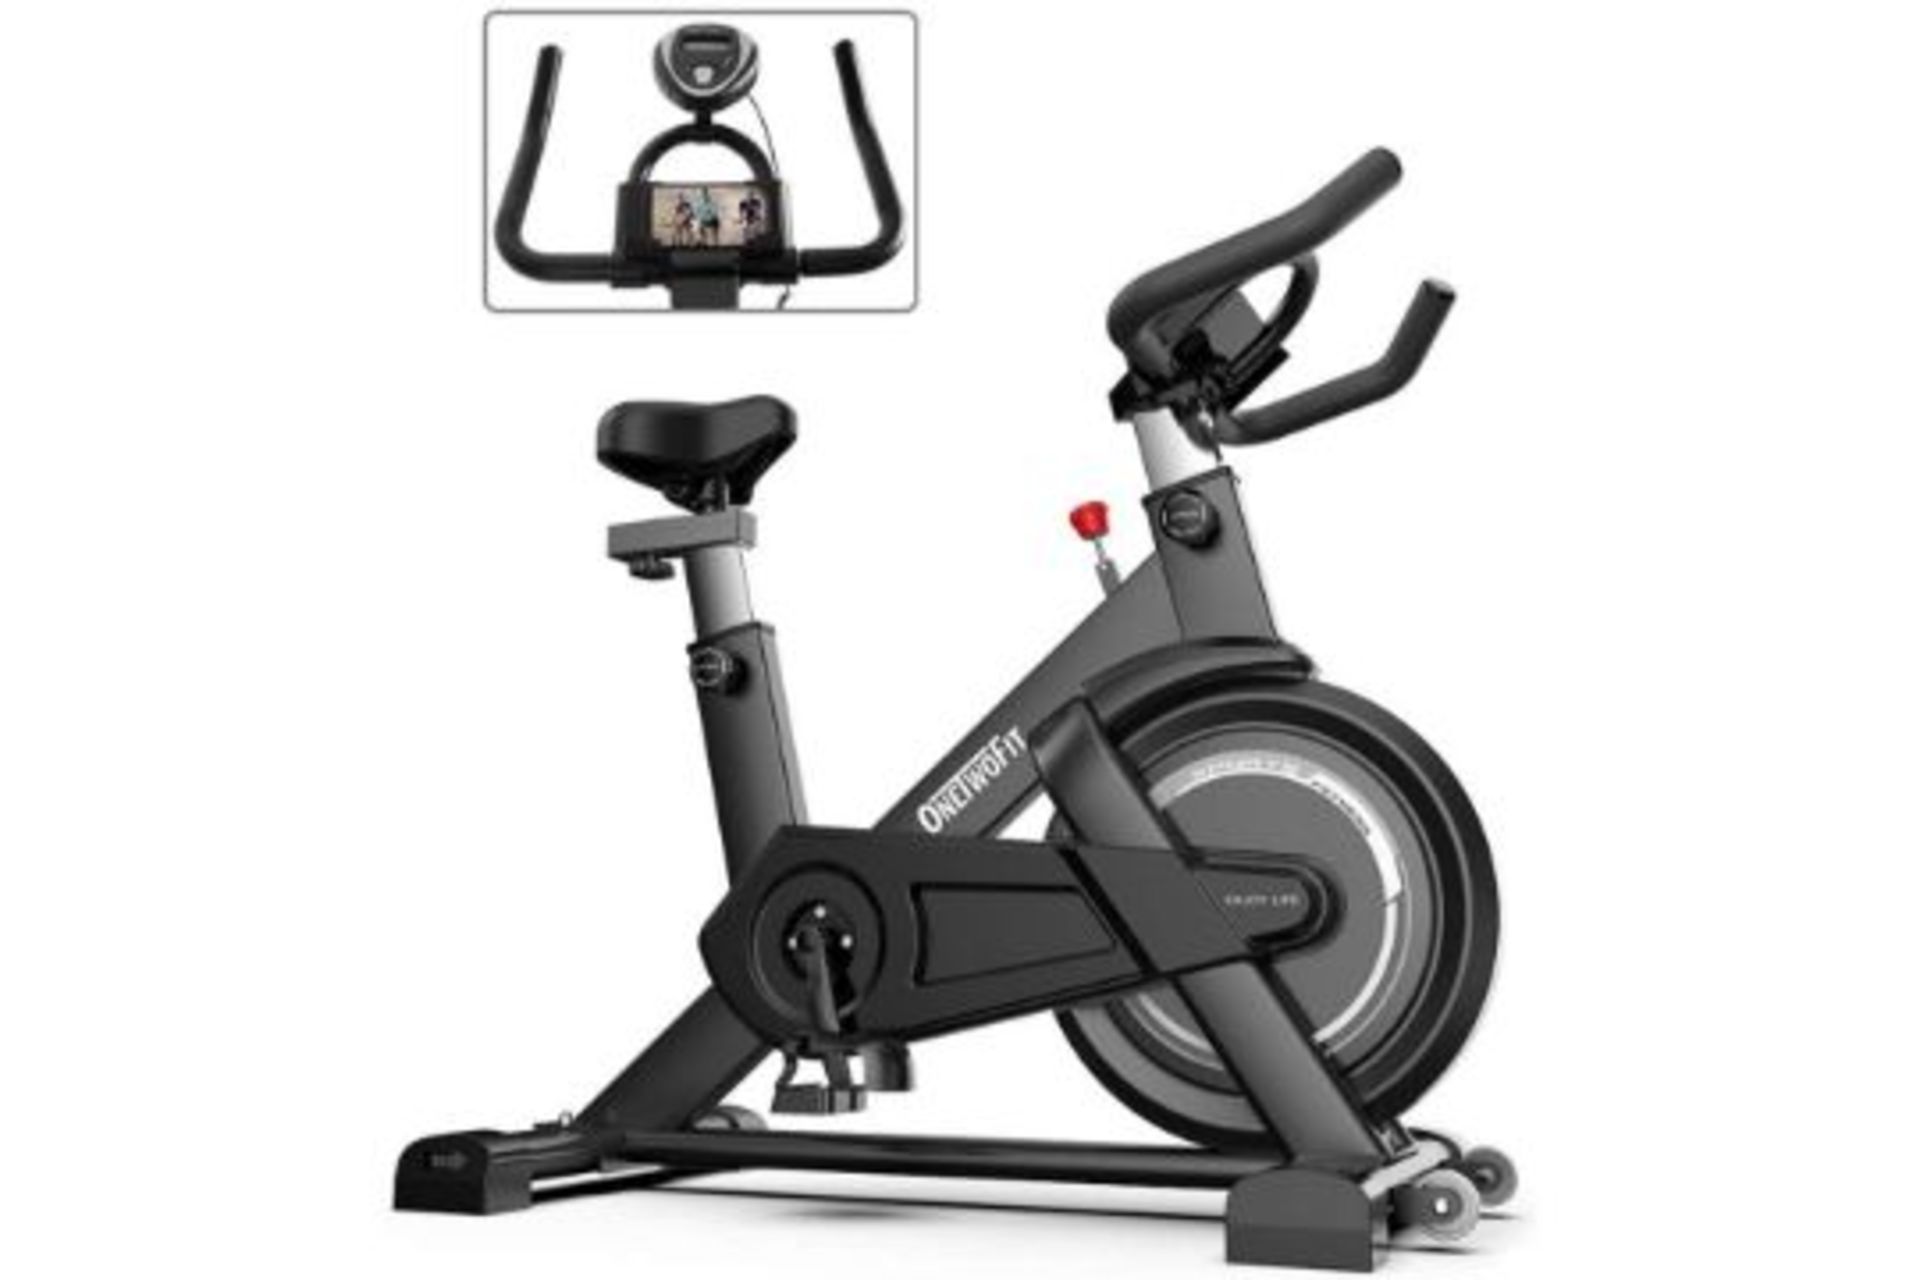 PALLET TO CONTAIN 5 X BRAND NEW GREY ONETWOFIT EXERCISE BIKE, CARDIO SPINNING BIKE WITH ADJUSTABLE